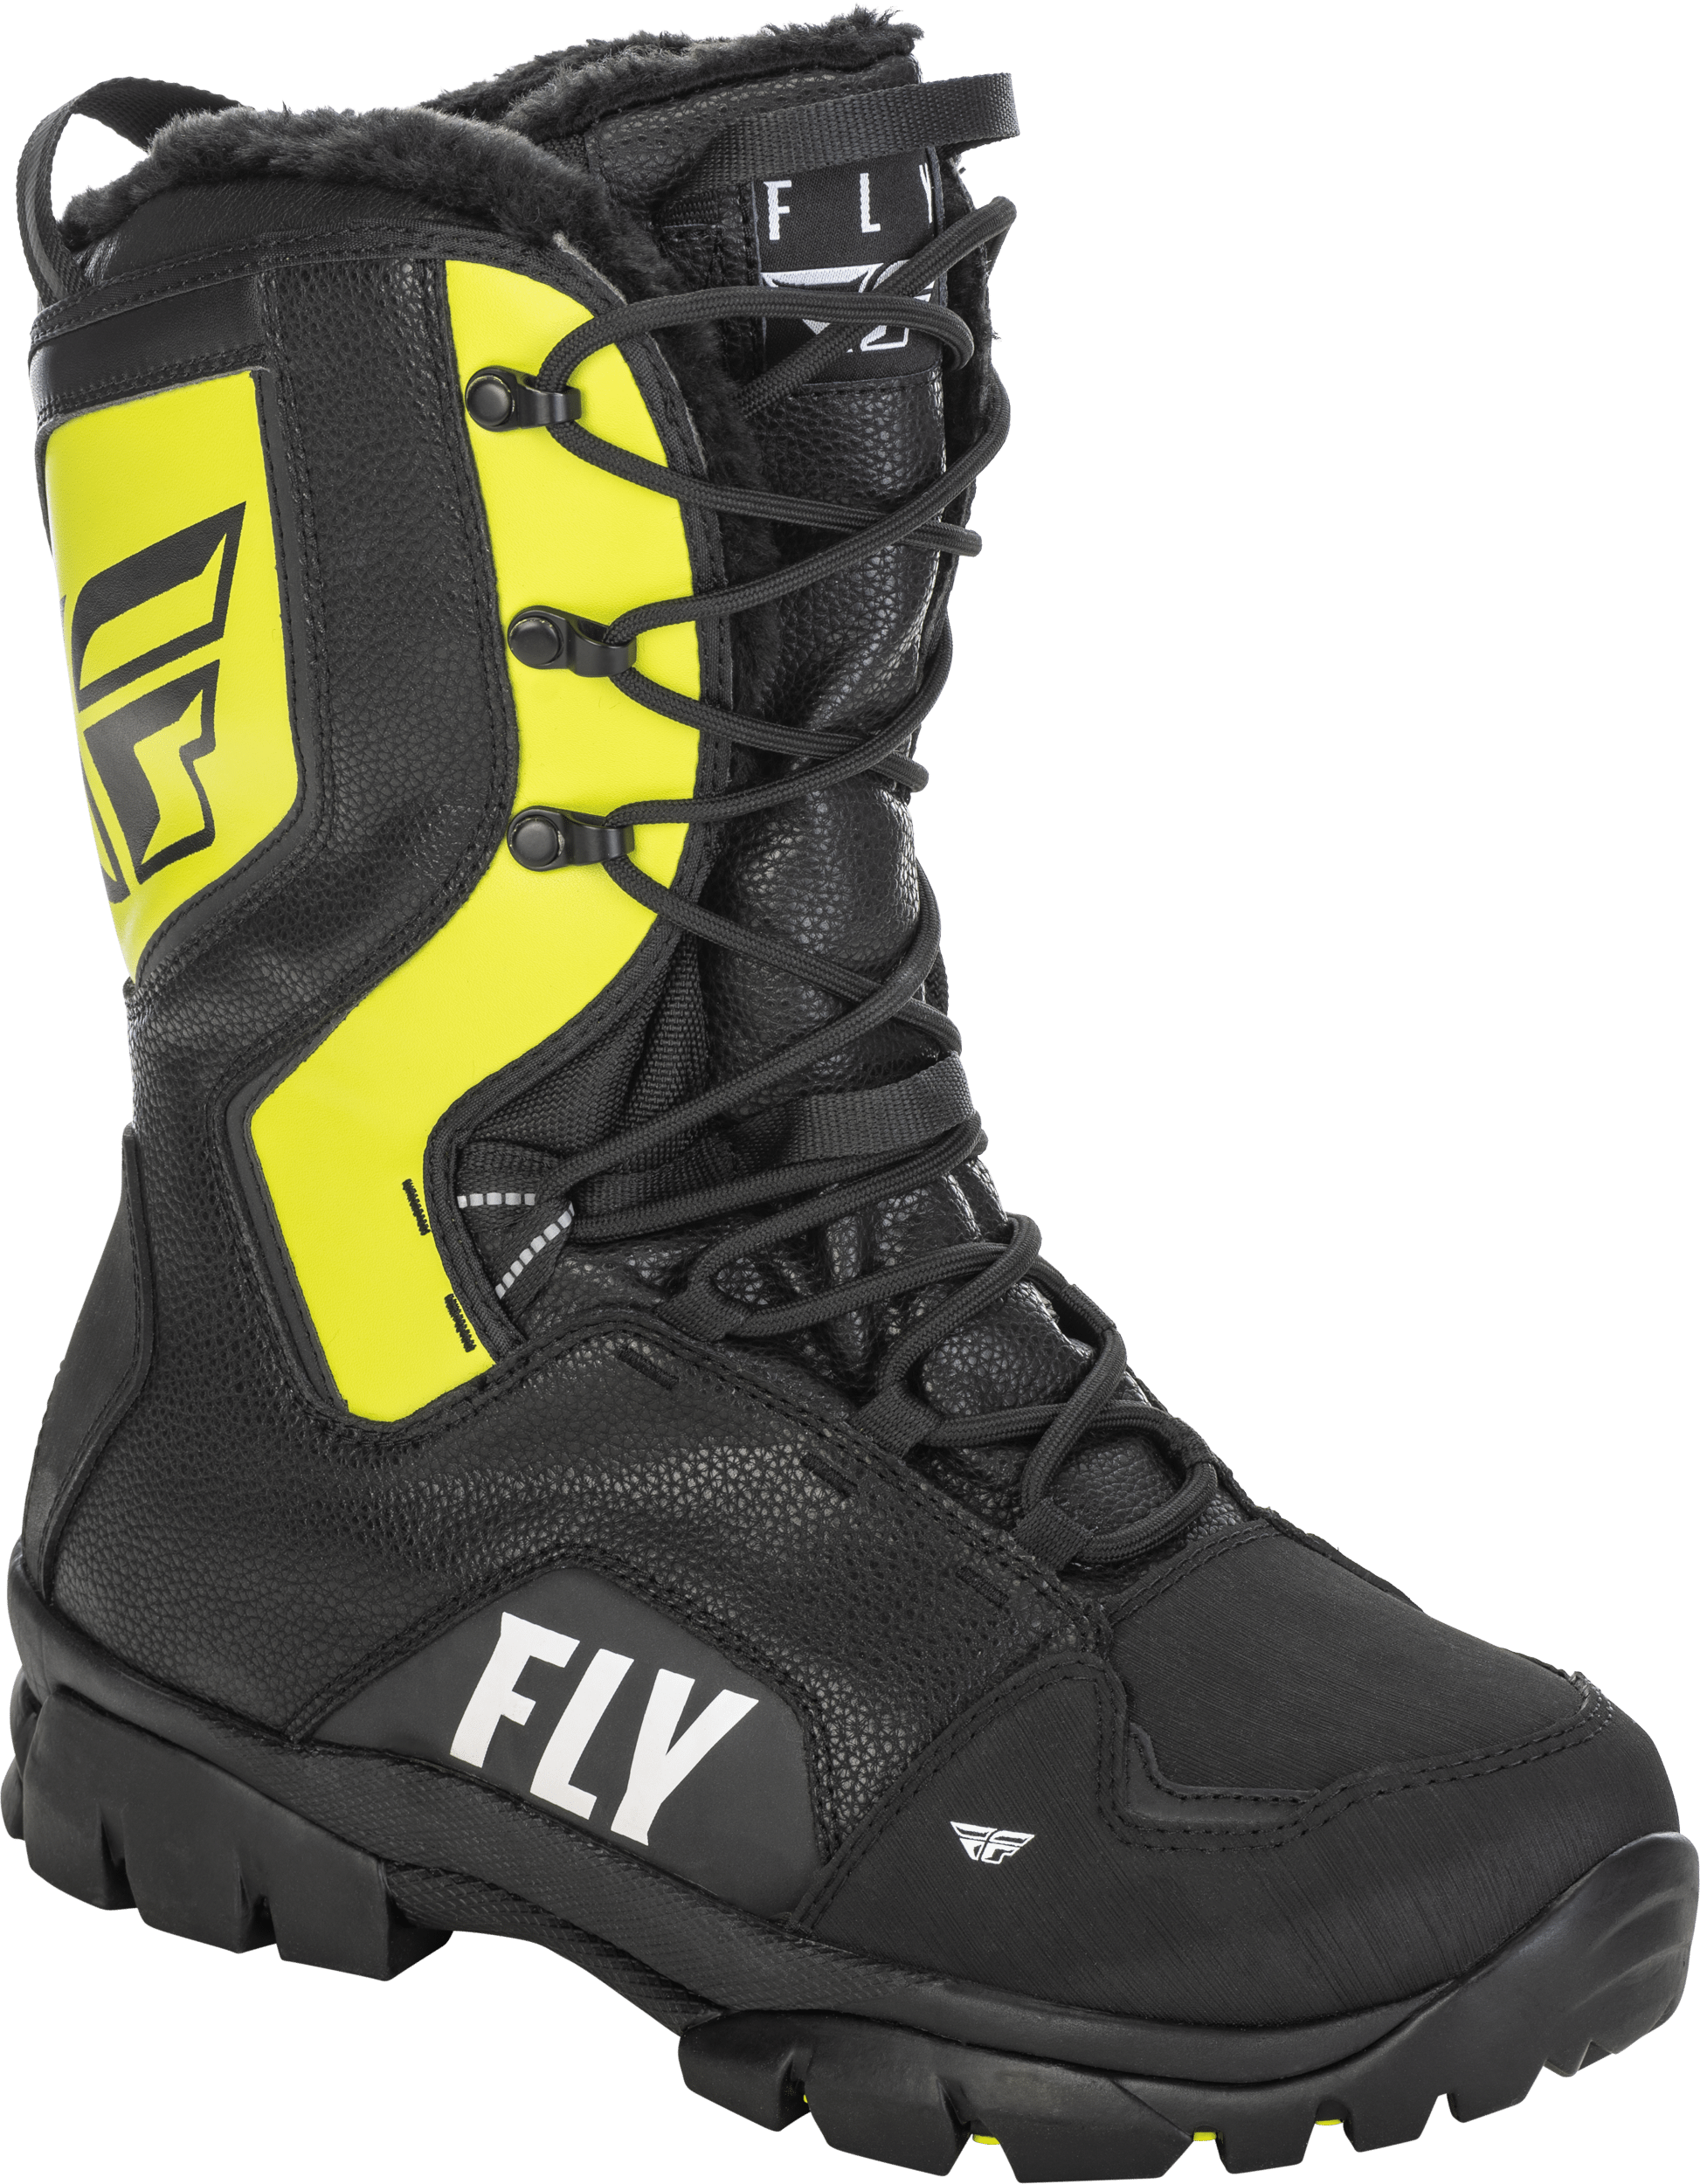 Western Powersports Boots Black/Grey/Hi-Vis Yellow / 6 Youth Marker Boot by Fly Racing 361-97306